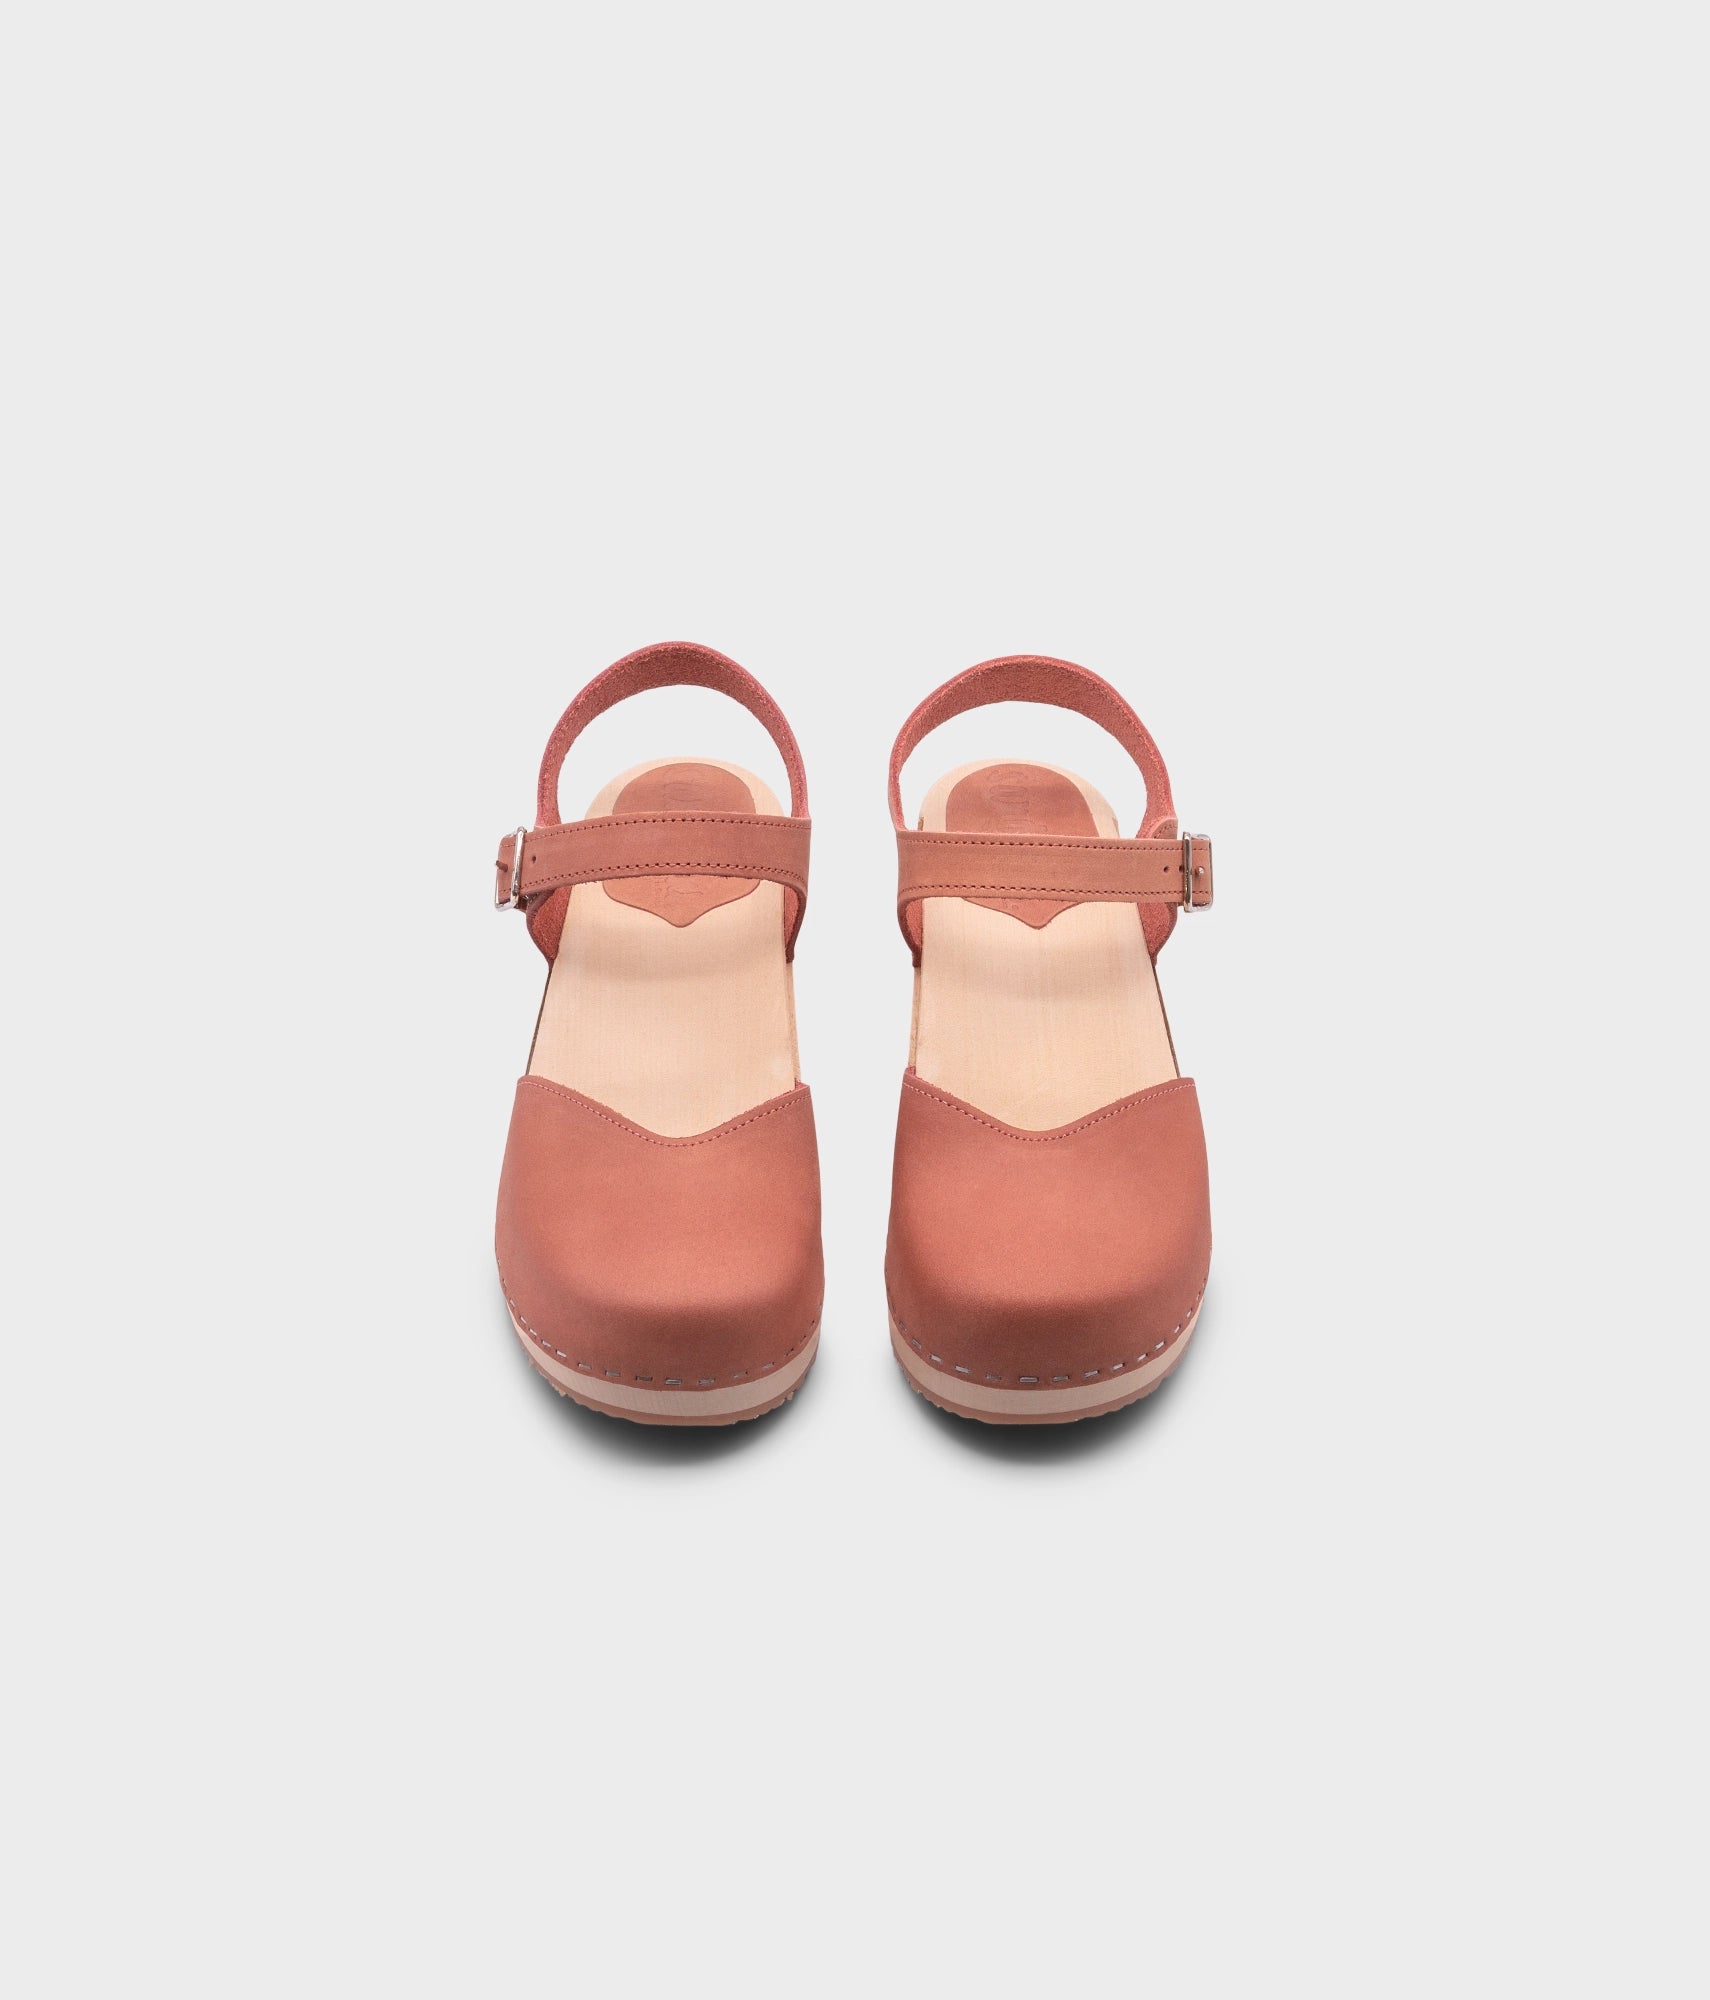 classic low heeled closed-toe sandal in blush pink nubuck leather stapled on a light wooden base